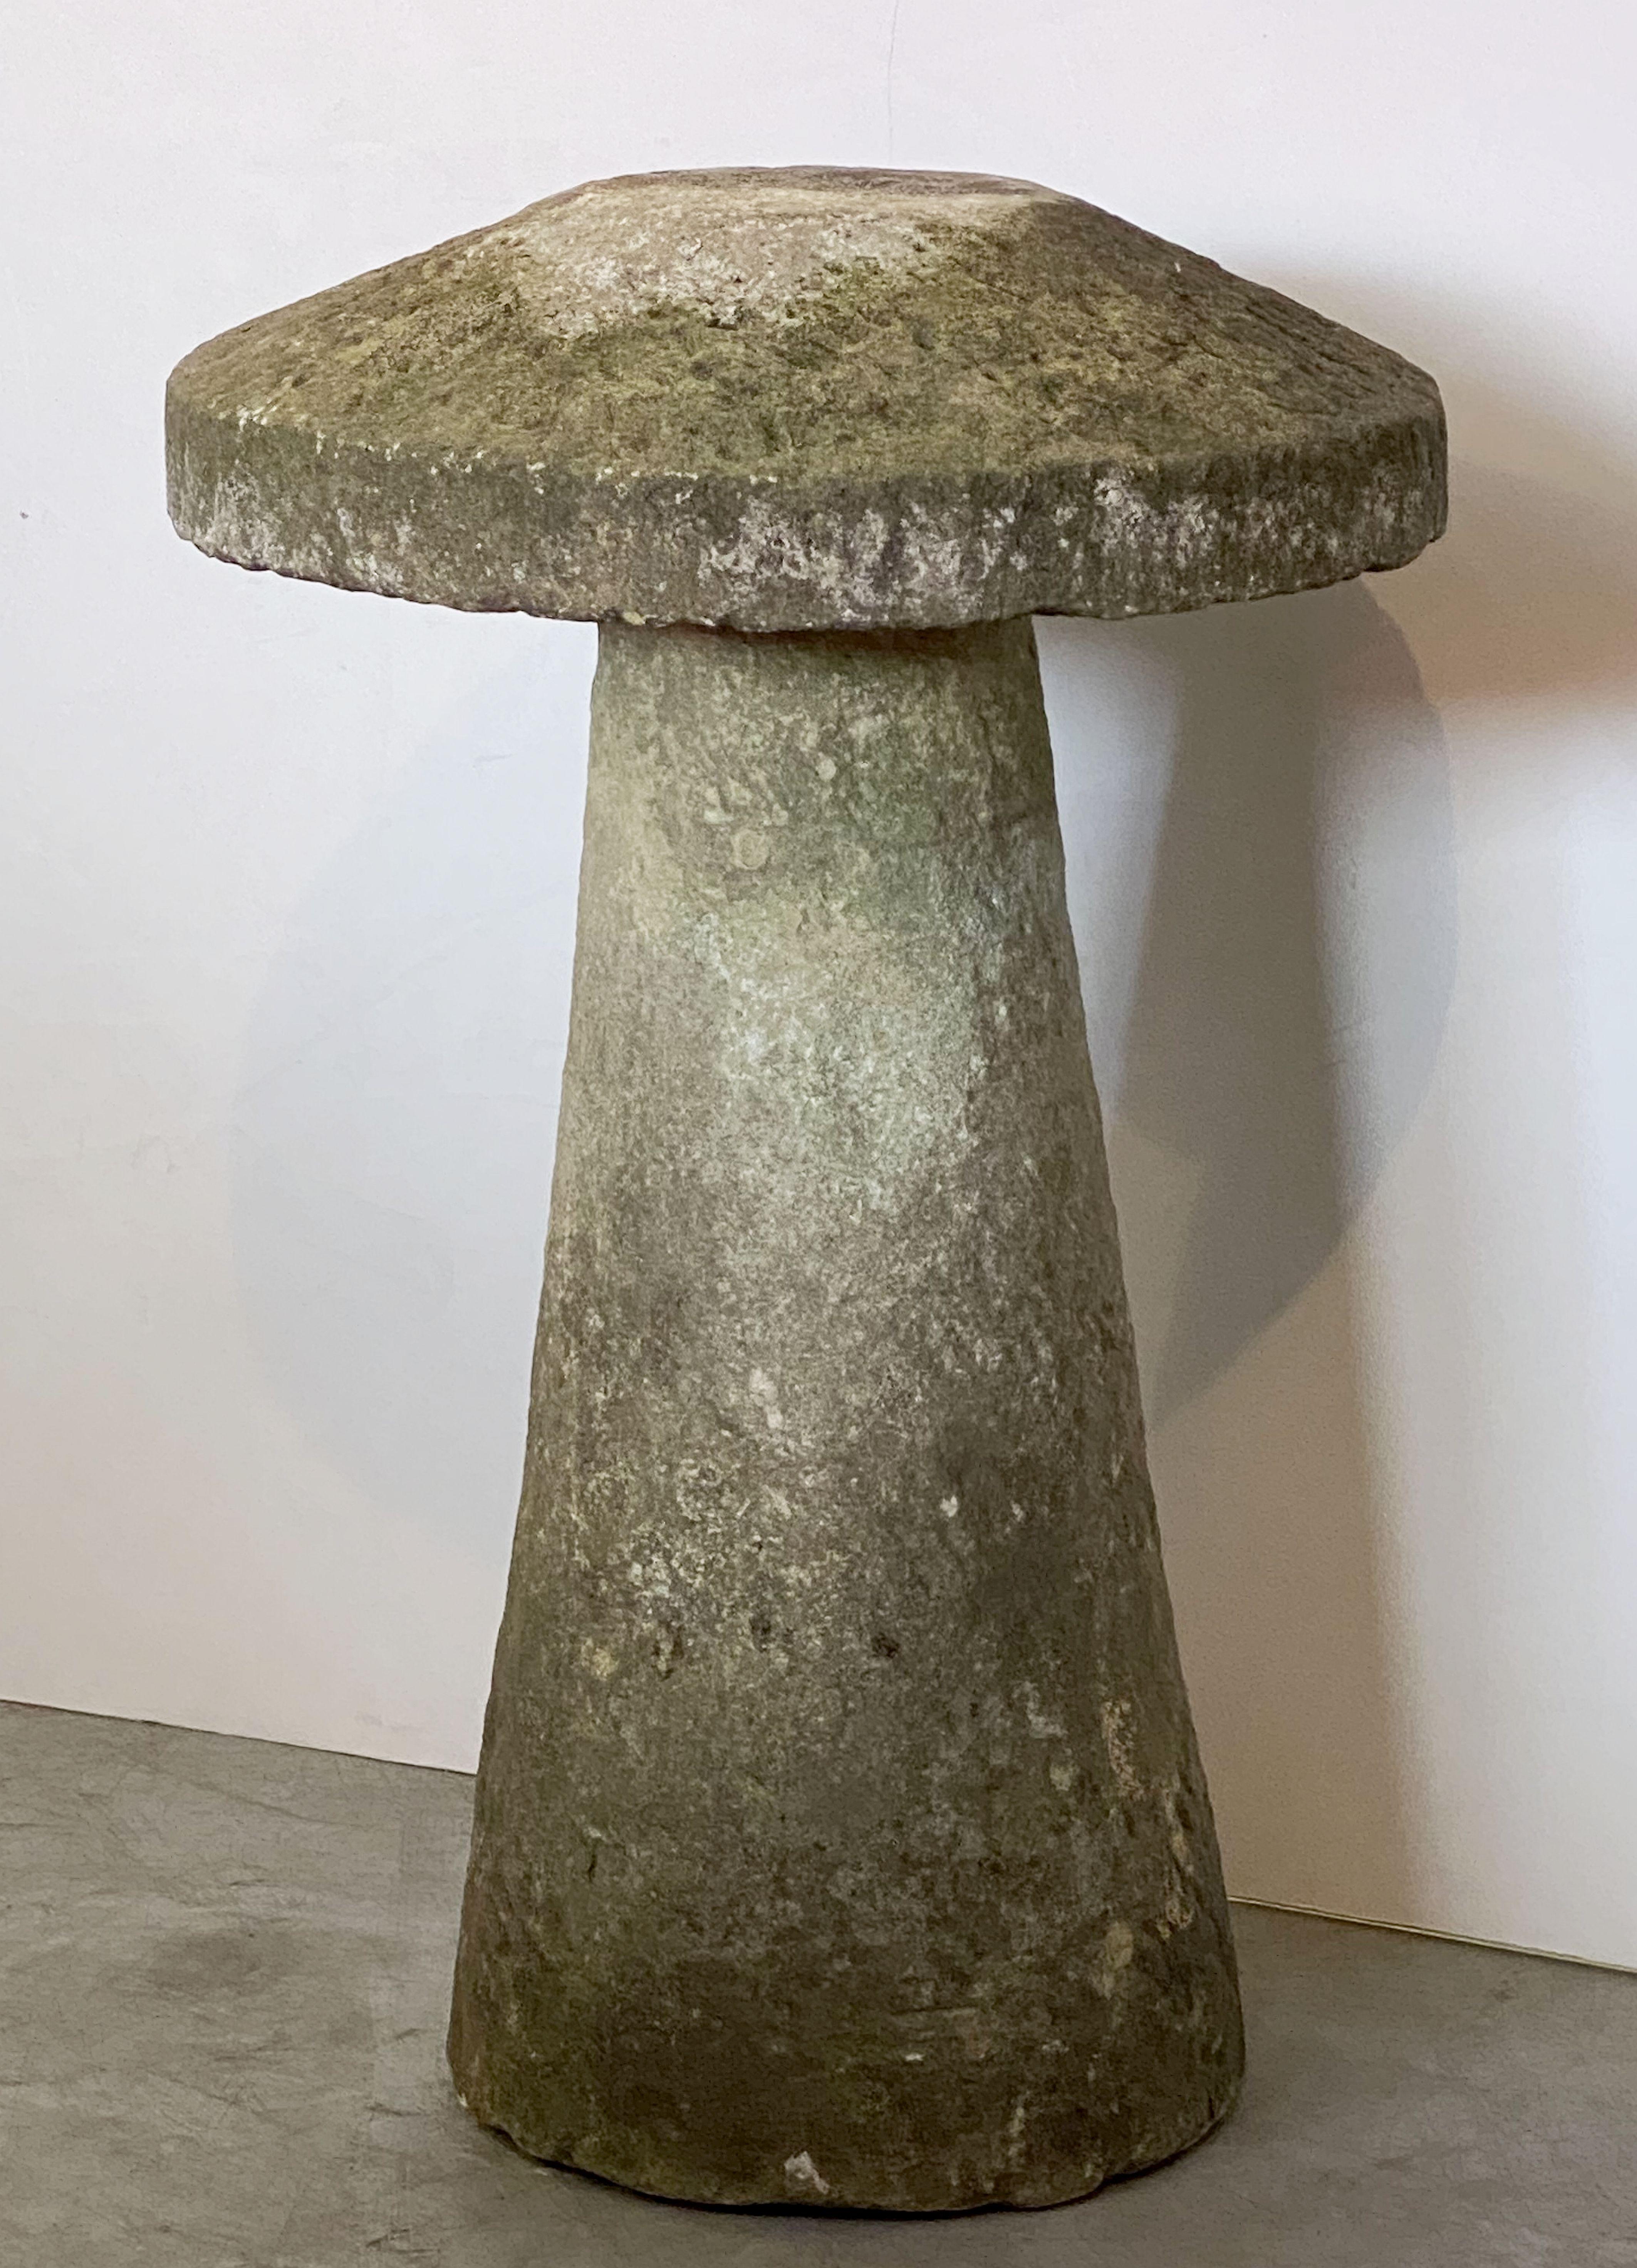 A steddle or staddle stone from the West Country of England, featuring a conical base mounted with a mushroom-shaped cap of quarried stone.

Use outdoors or indoors to create a contemporary or rustic English-garden effect. 
They are often used in